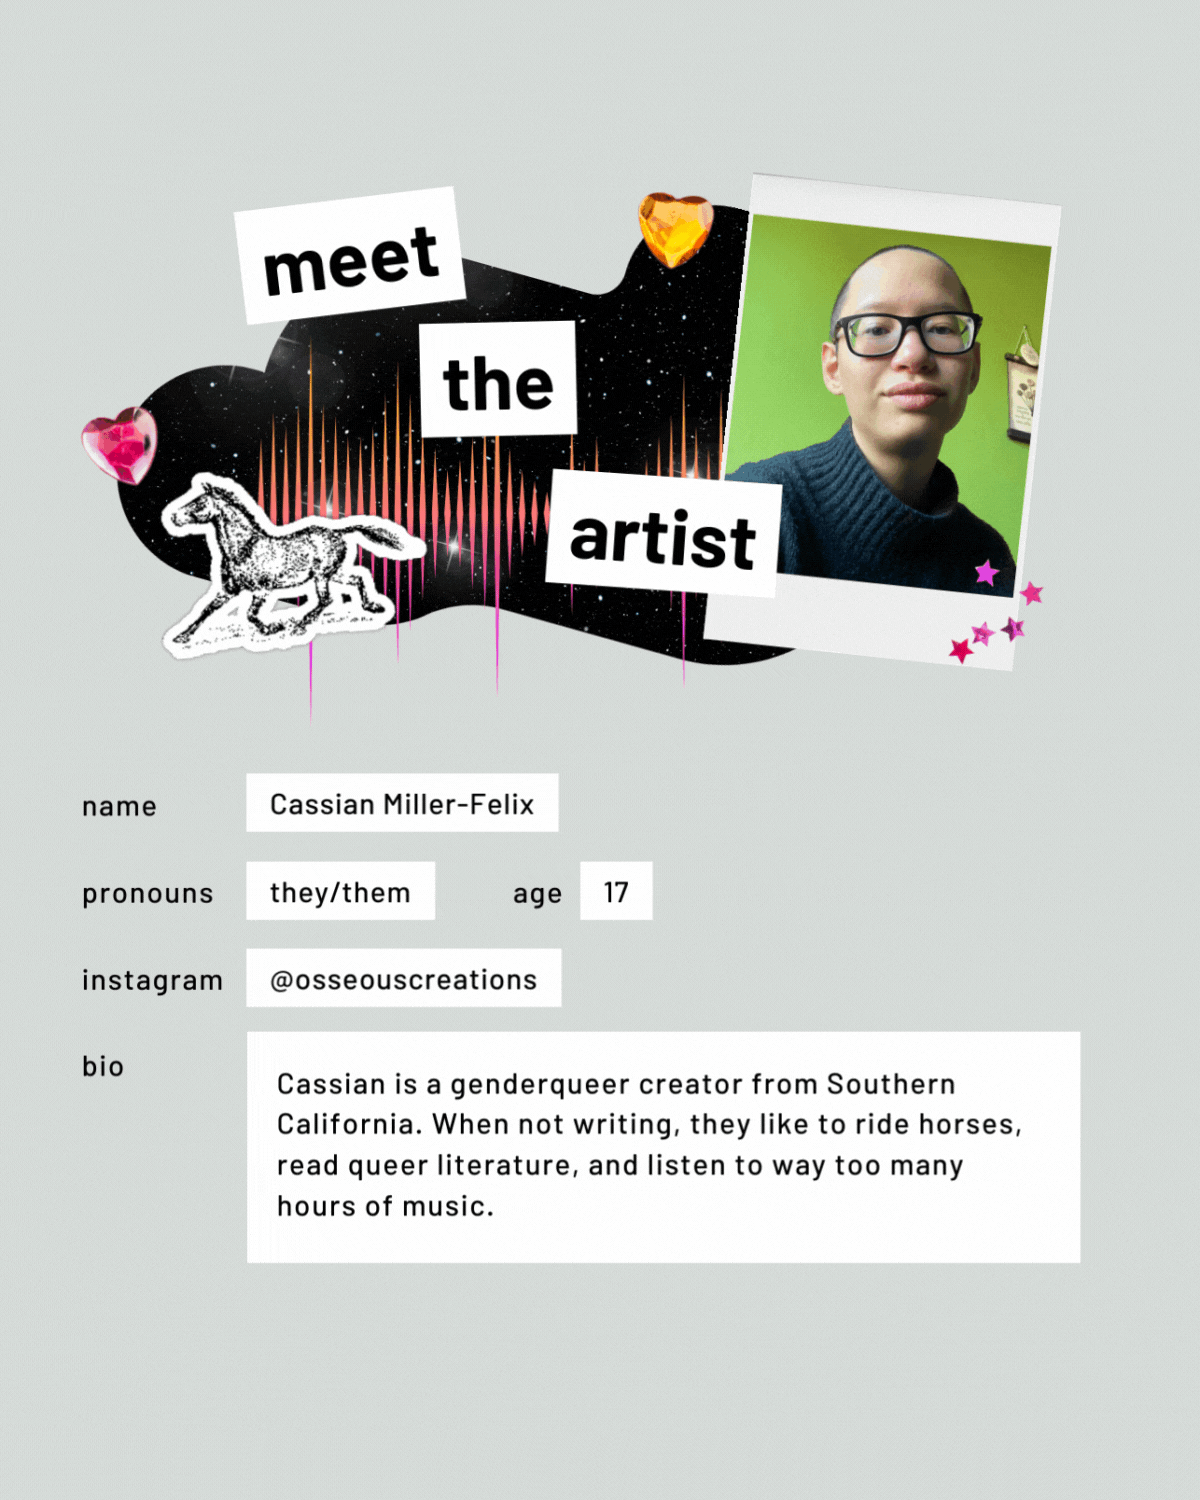 Meet the artist page with a photo. Name: Cassian Miller-Felix. Pronouns: they/them. Age: 17. Instagram: @osseouscreations. Bio: Cassian is a genderqueer creator from Southern California. When not writing, they like to ride horses, read queer literature, and listen to way too many hours of music.